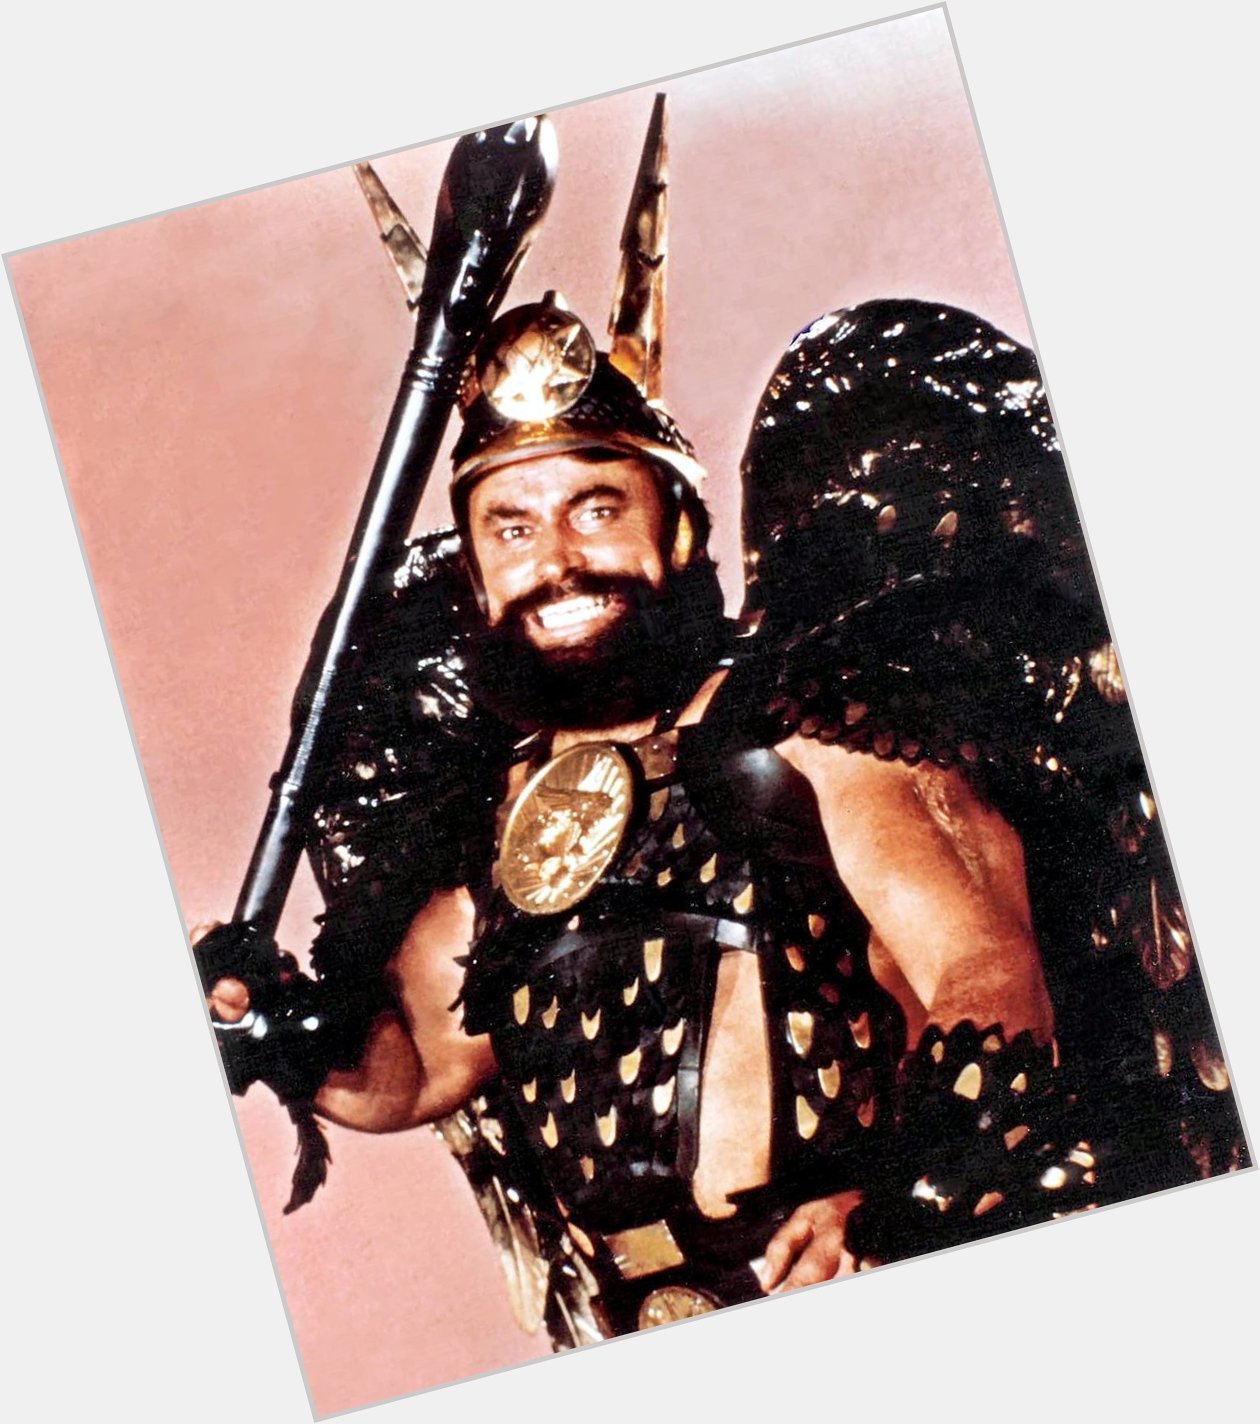 Wishing the inimitable Brian Blessed a very happy 82nd birthday! 